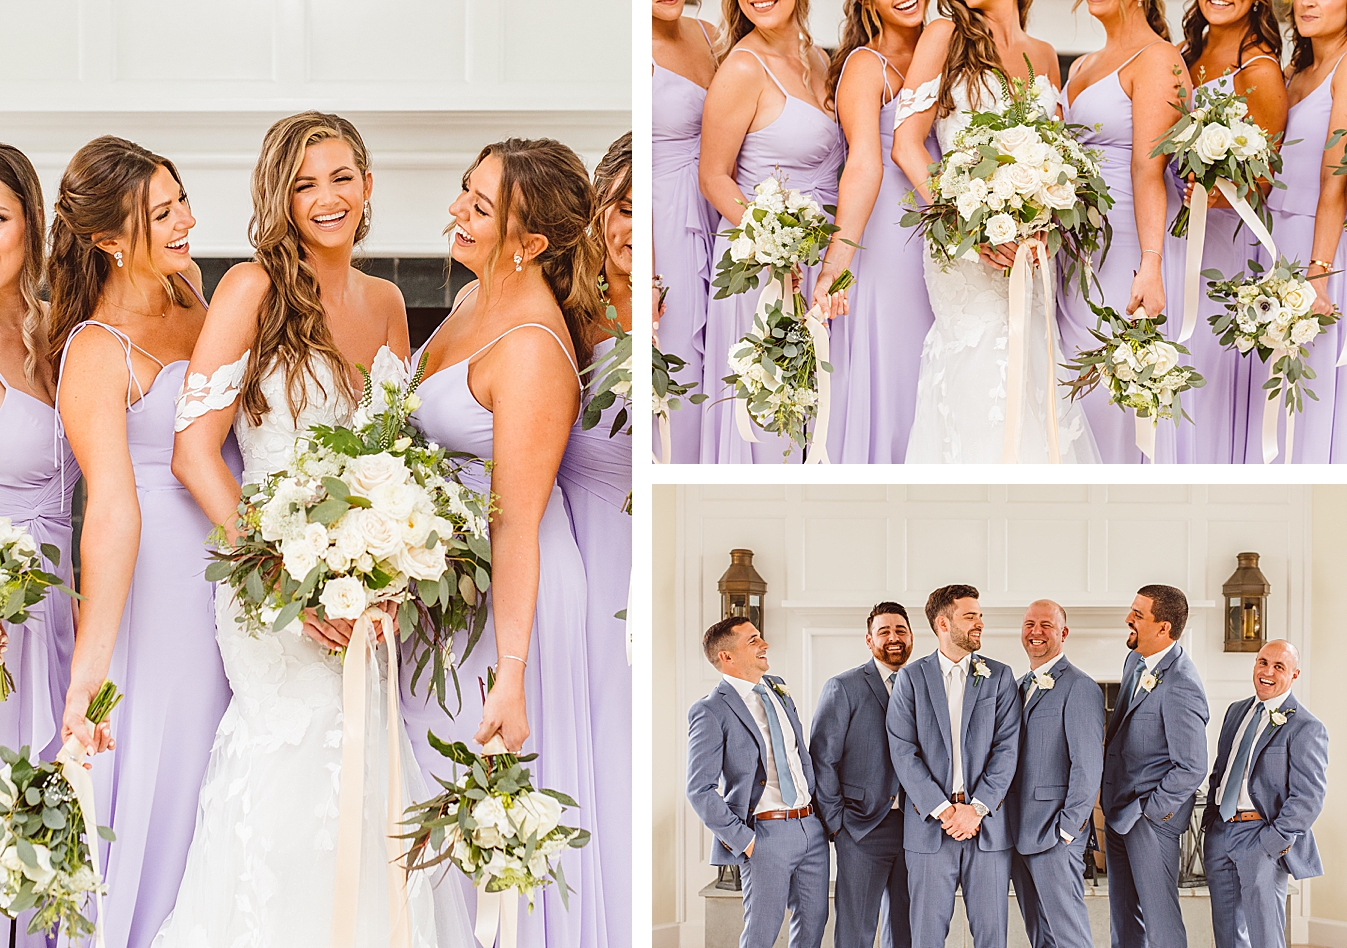 Bride laughing with bridesmaids in pale purple dresses | Bridesmaids in pale purple dresses holding white bouquets standing with bride | groom and groomsmen in steel blue suits | Brooke Michelle Photo